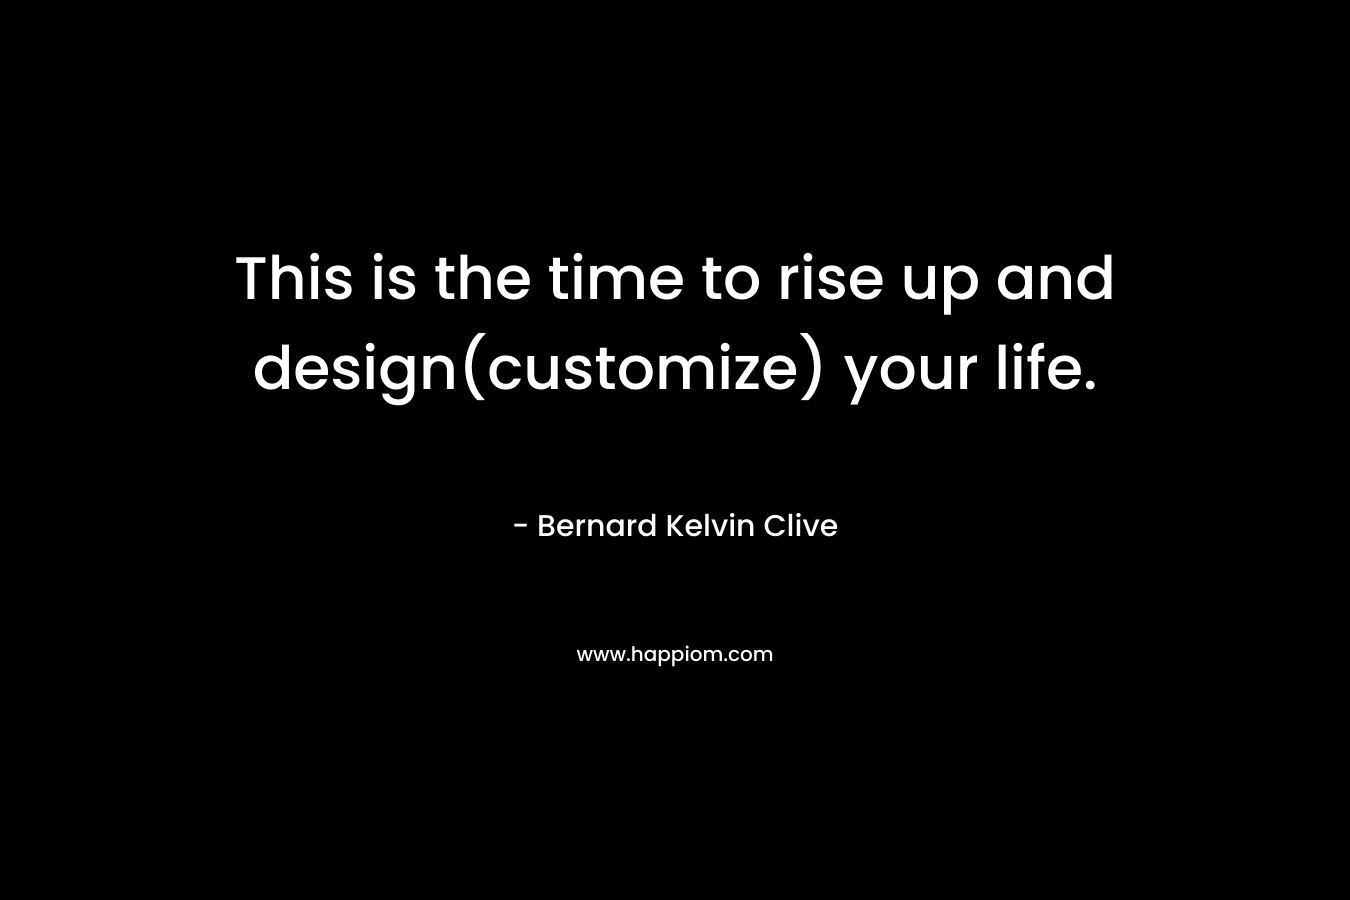 This is the time to rise up and design(customize) your life. – Bernard Kelvin Clive